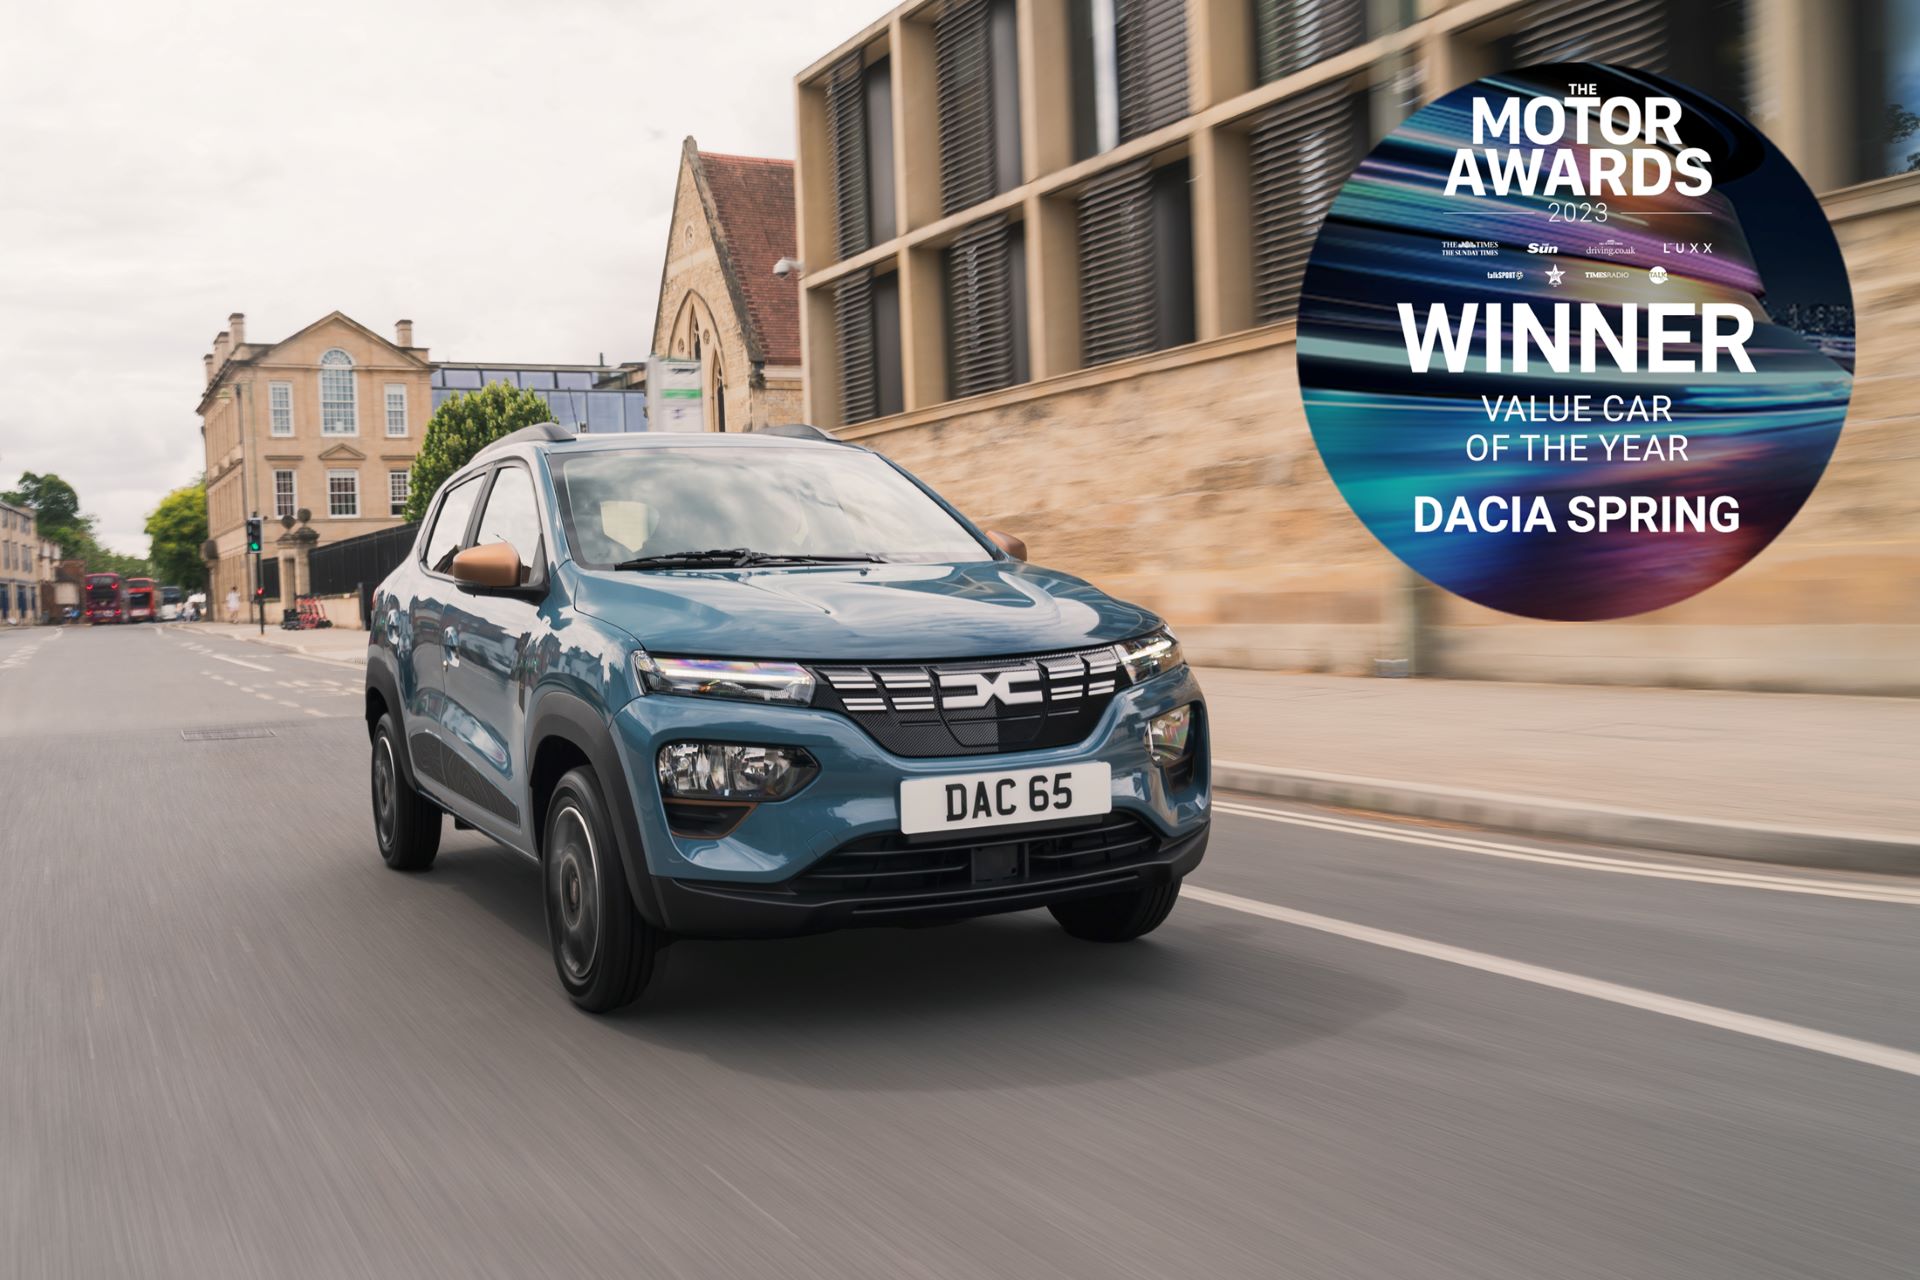 All-electric Dacia spring wins ‘Value Car of the Year’ at News UK Motor Awards